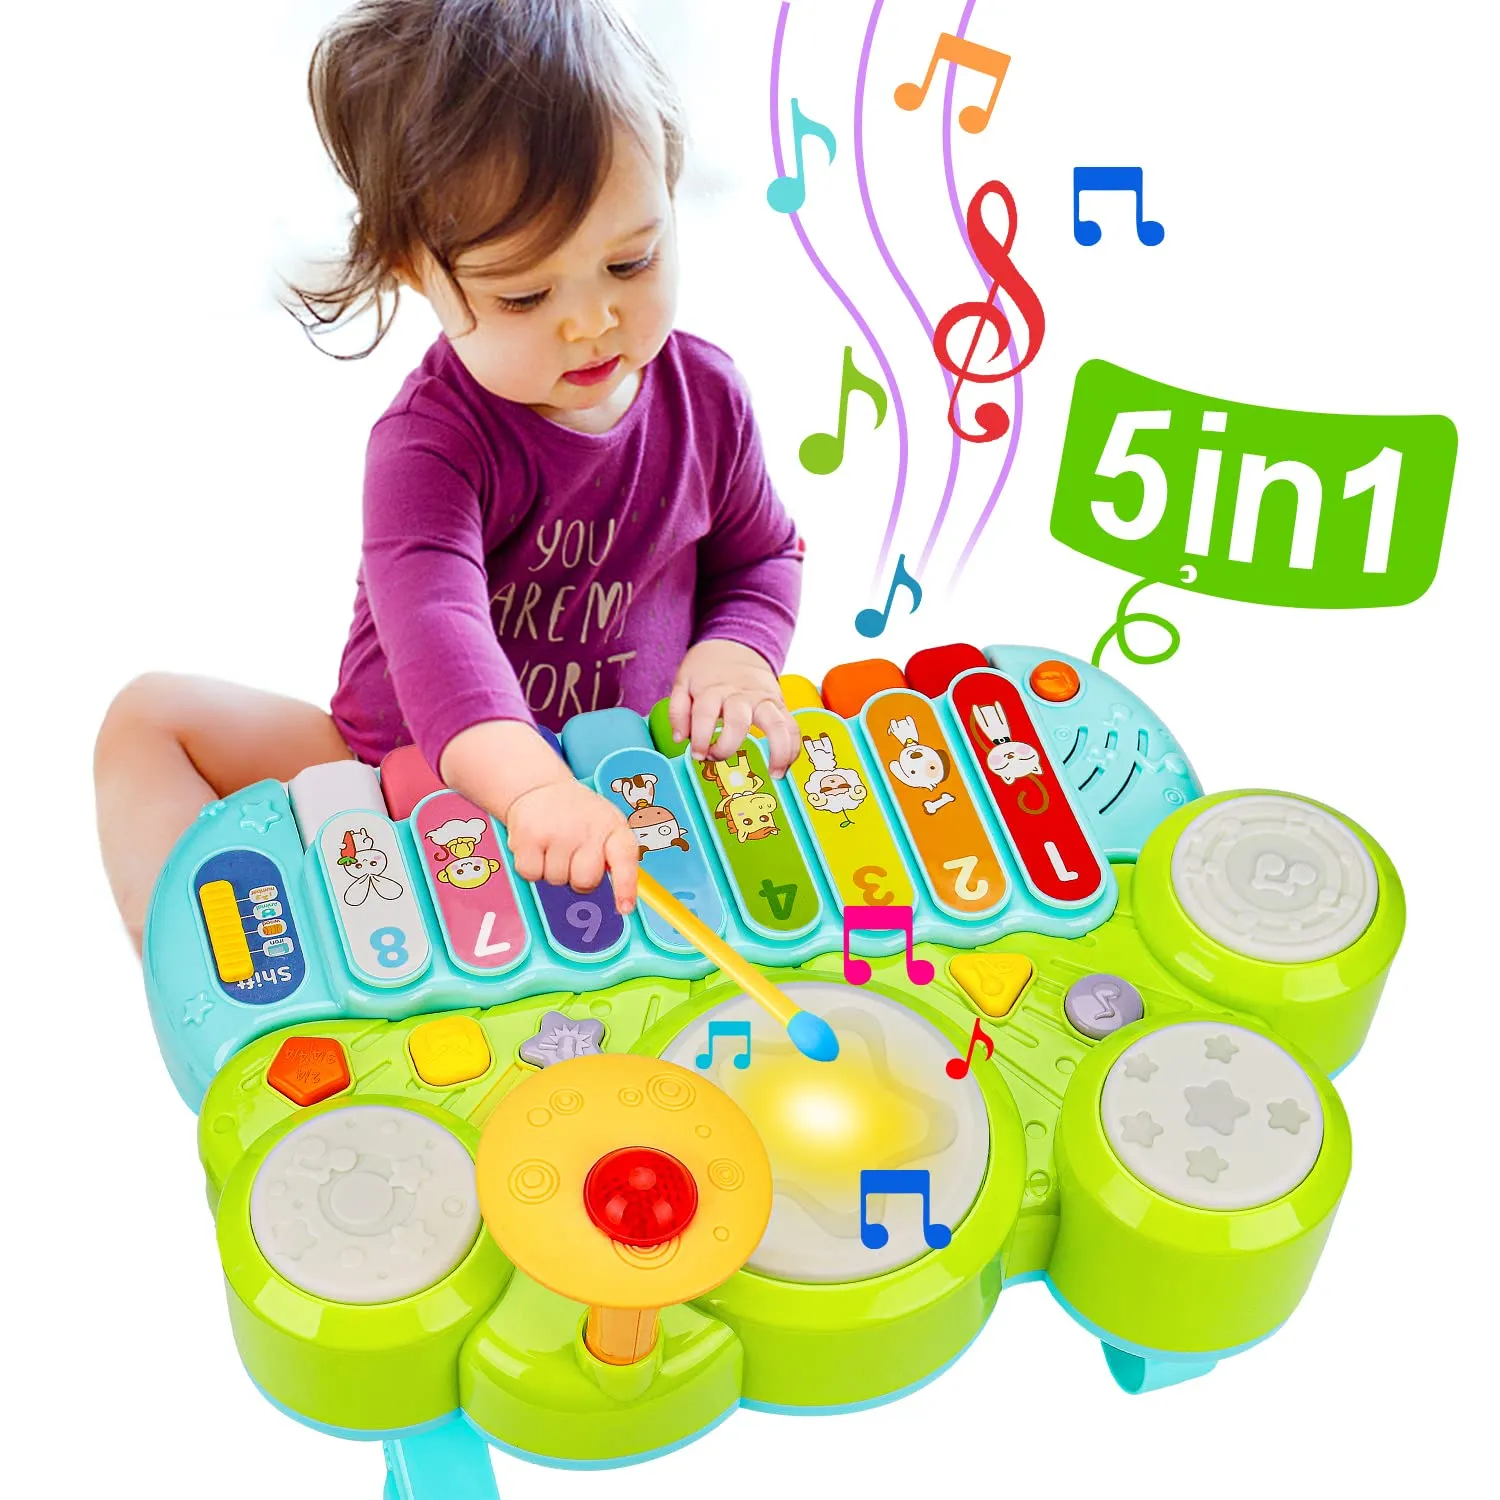 Baby Musical Toys 3 in 1 Piano Keyboard Xylophone Drum Set